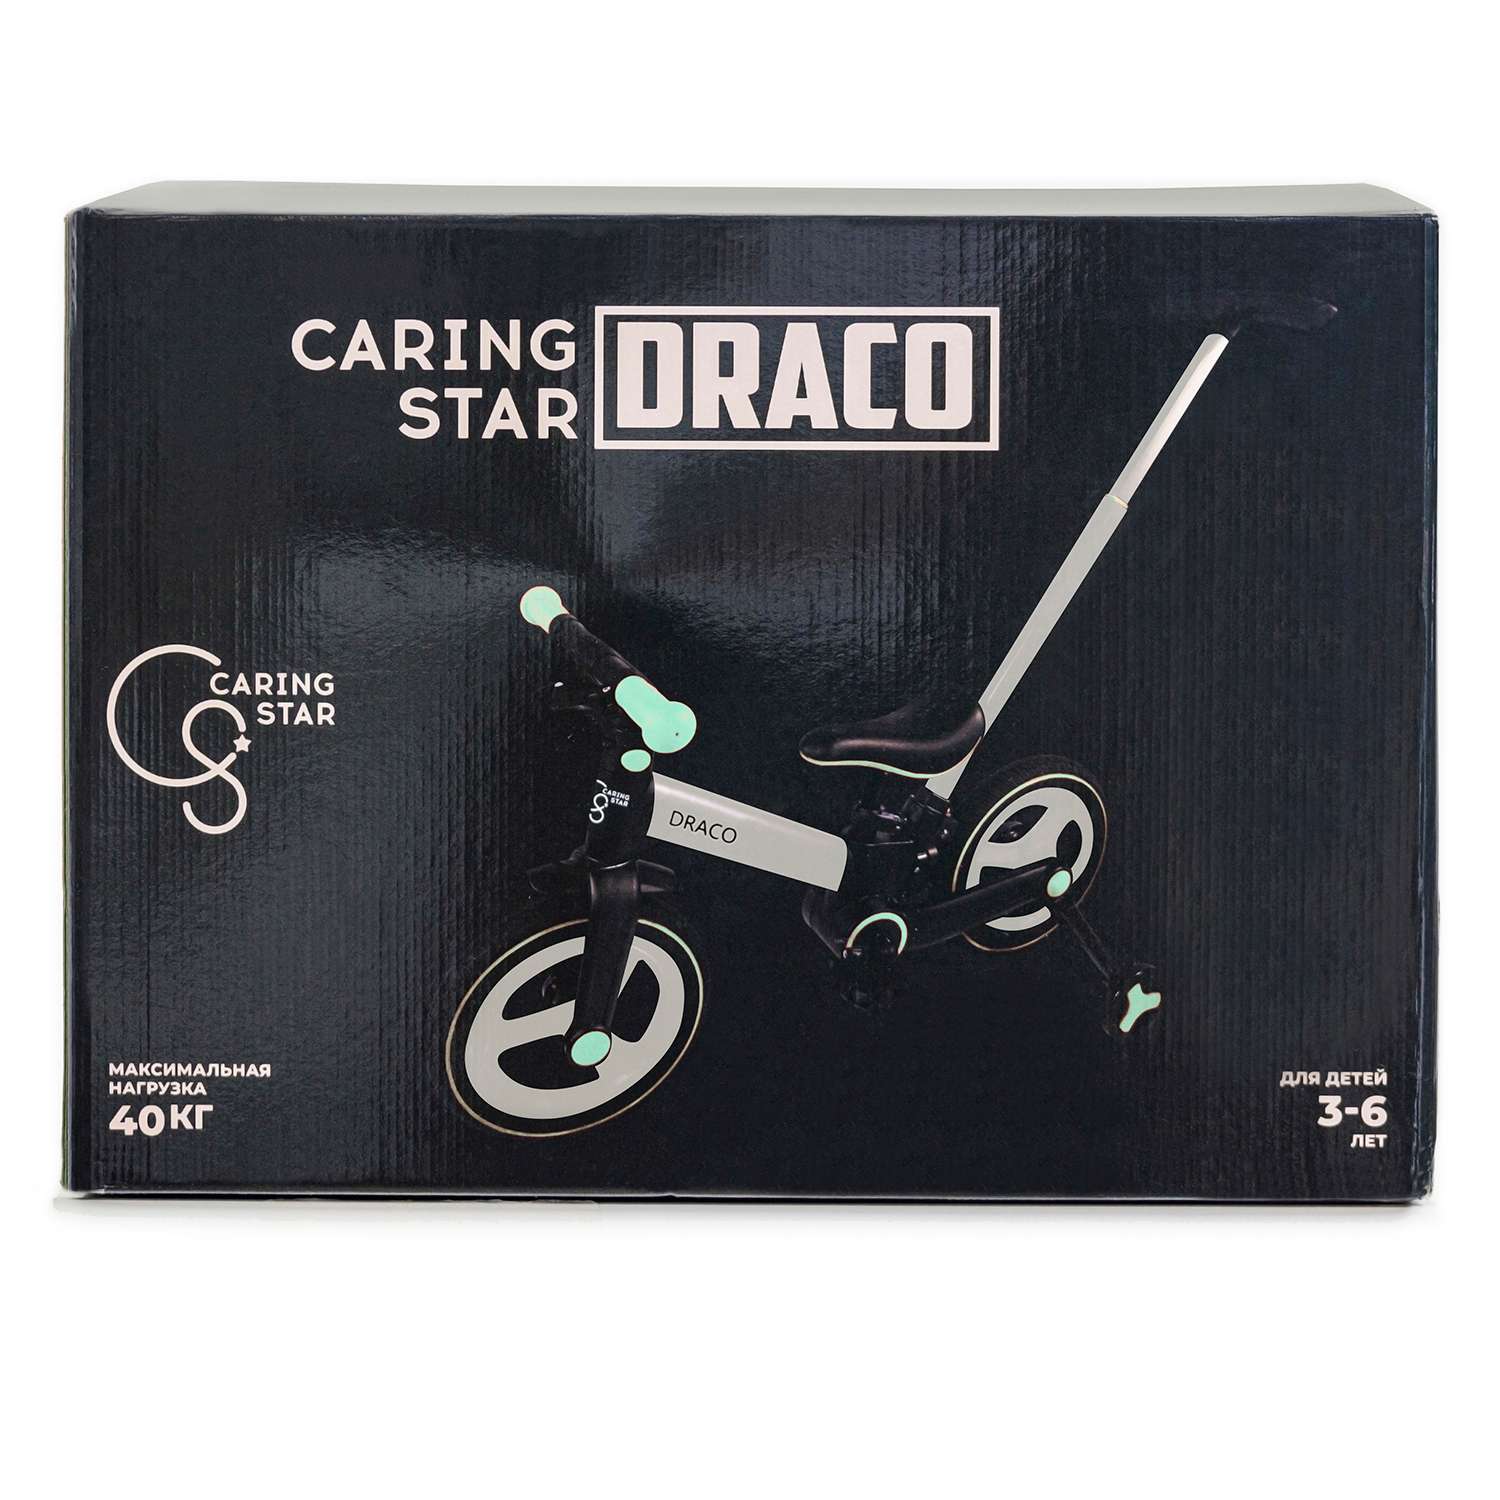 Caring star draco. Велосипед caring Star. Велосипед Kerin Star Draco. Велосипед Kerin Star Draco Avito.